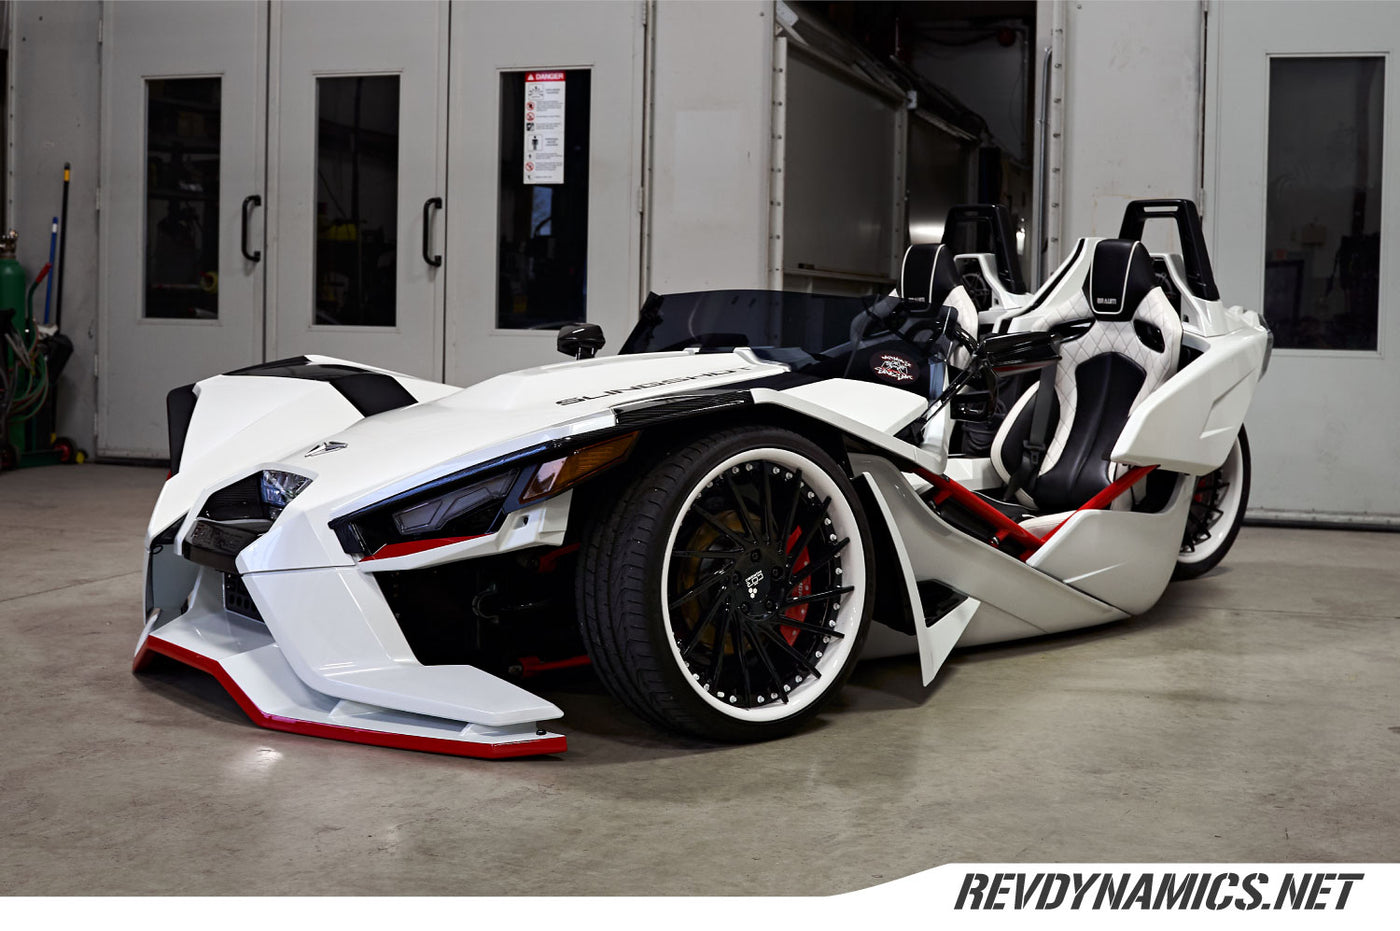 2016 Polaris Slingshot on 20" rims and air ride suspension